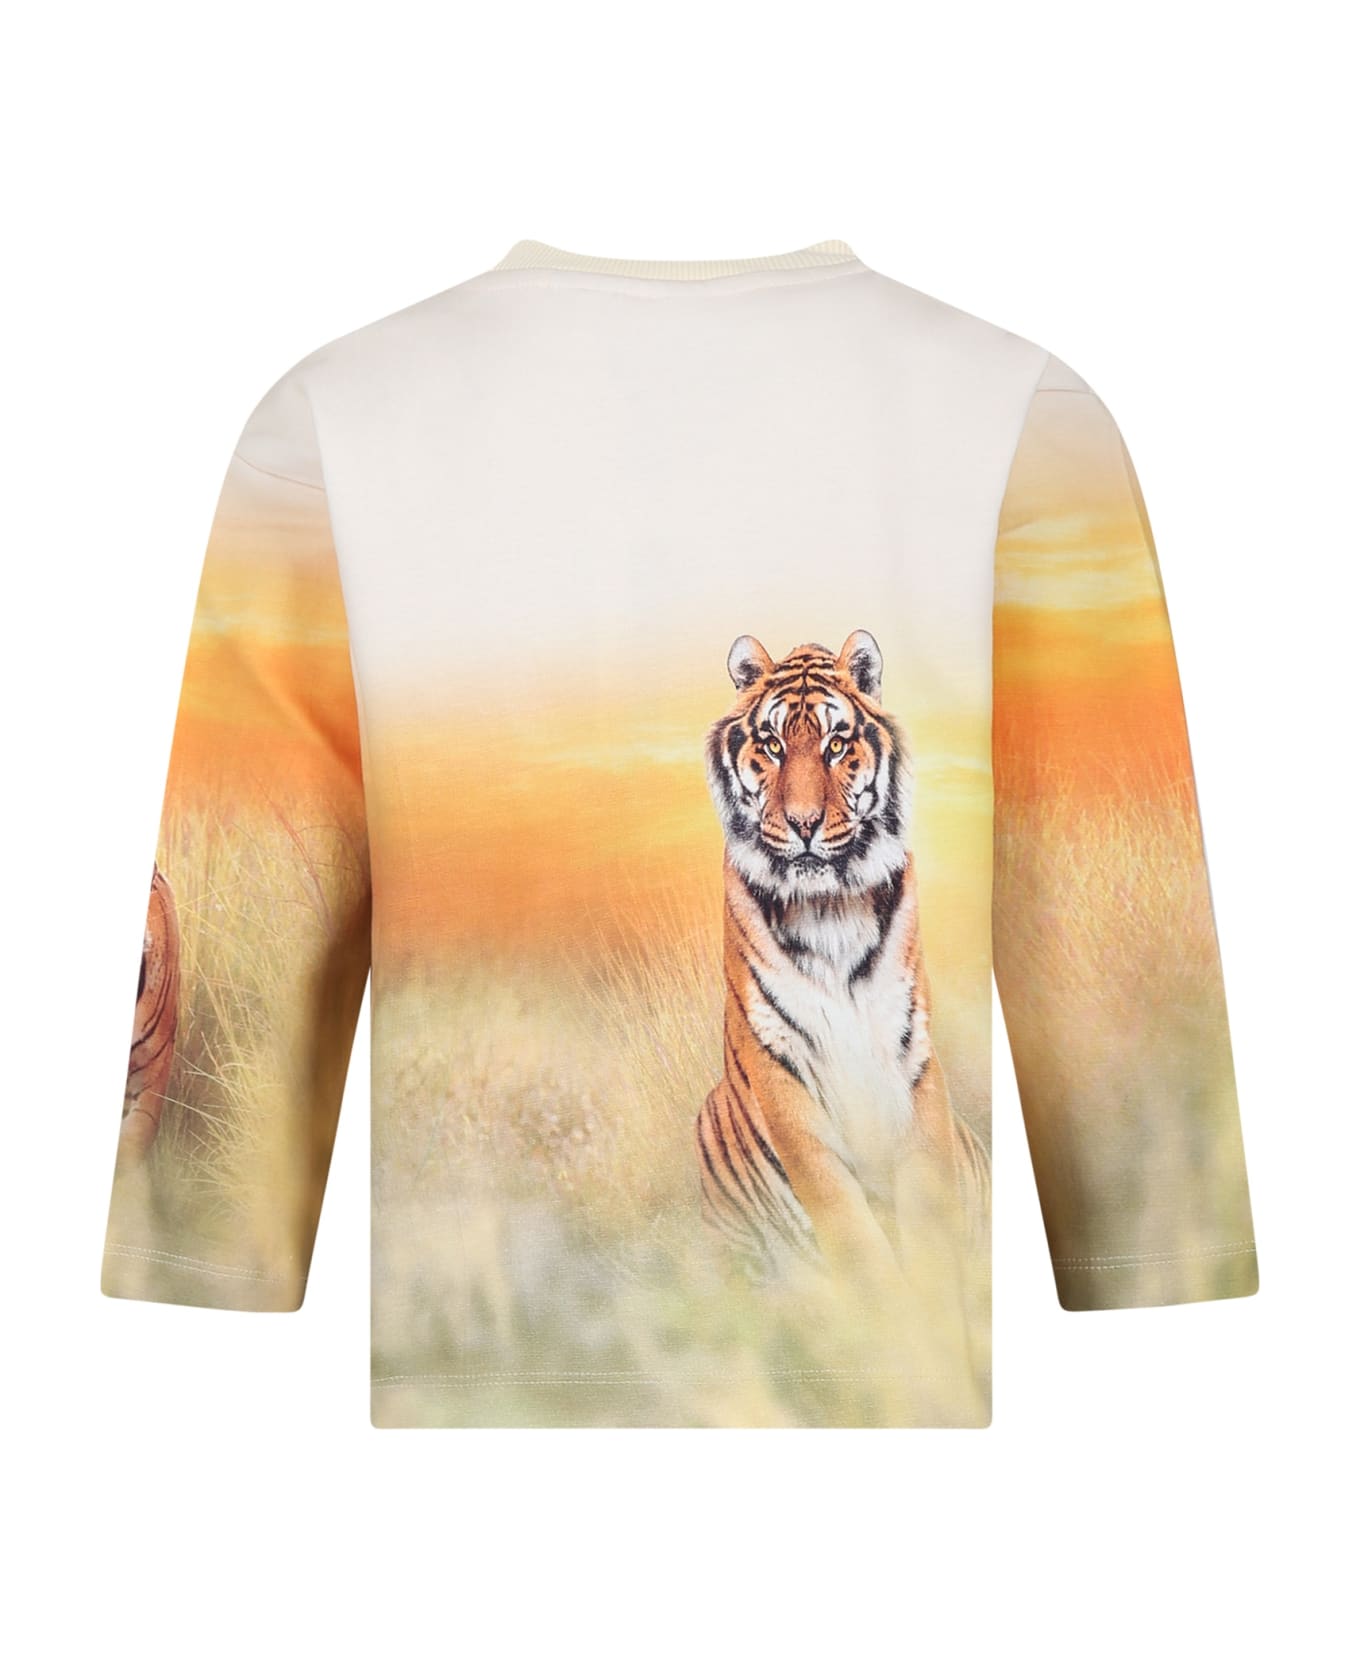 Molo Ivory Sweatshirt For Boy With Tiger Print - Ivory